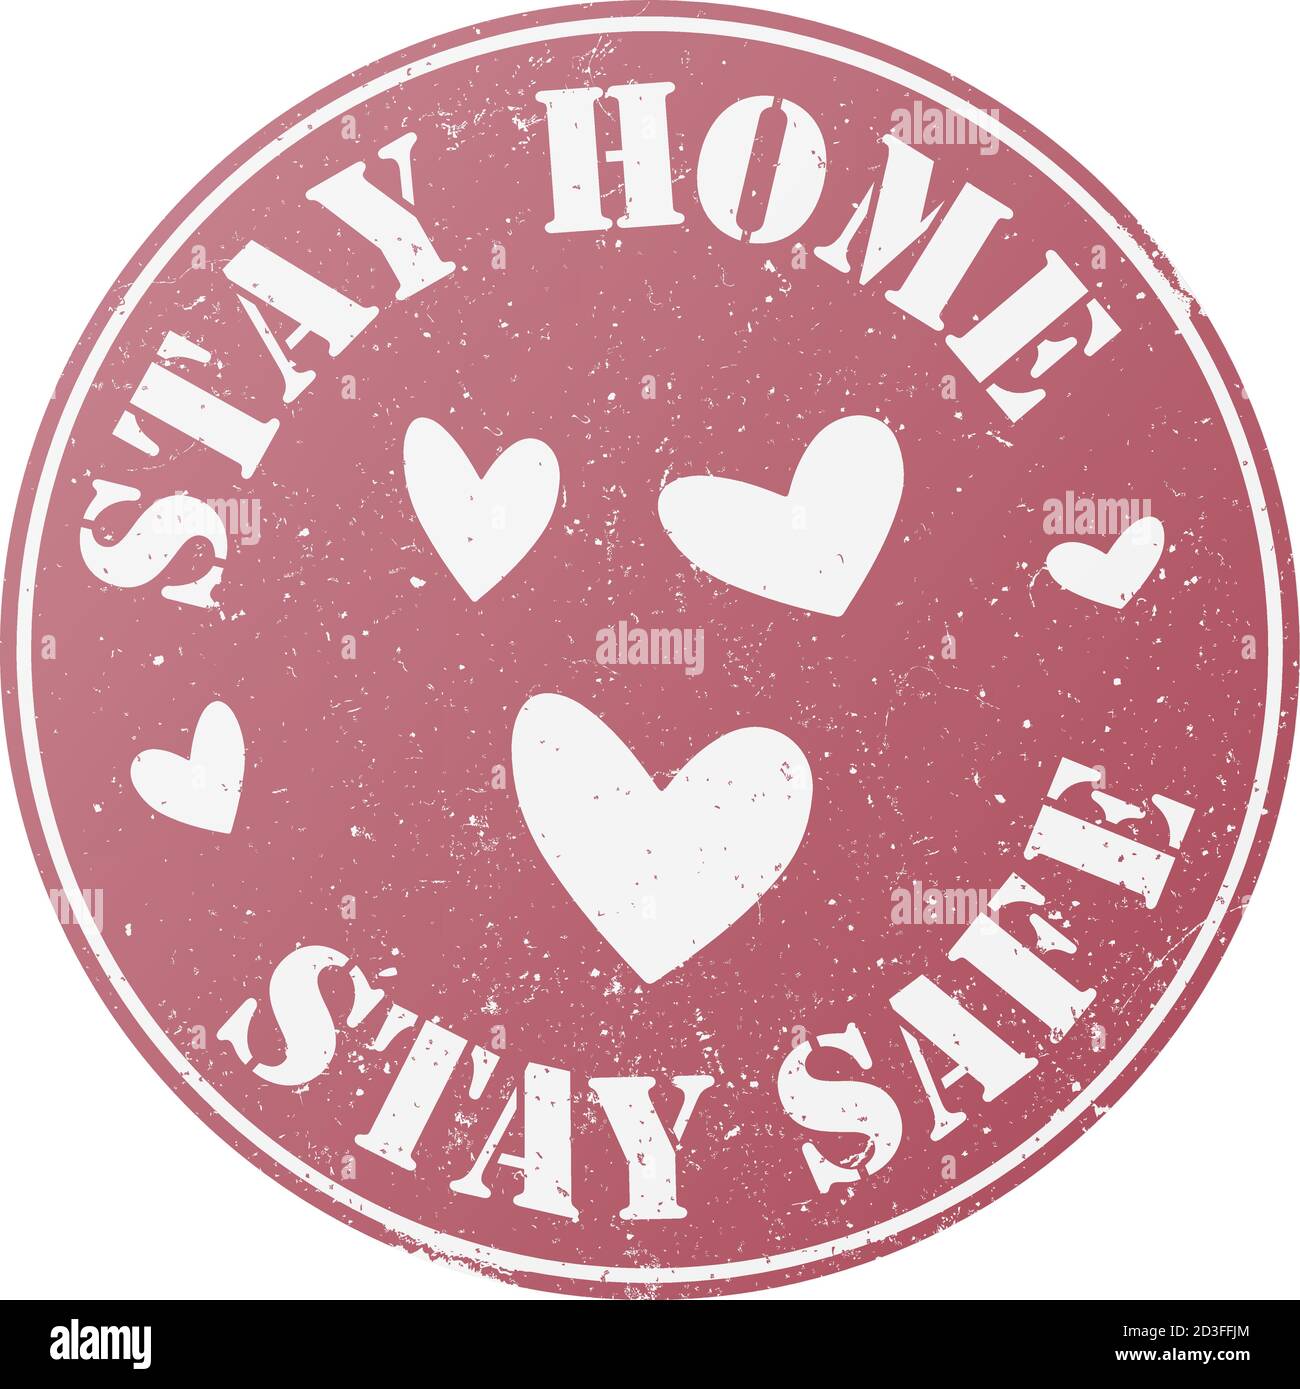 grungy round STAY HOME, STAY SAFE stamp or badge with hearts vector illustration Stock Vector